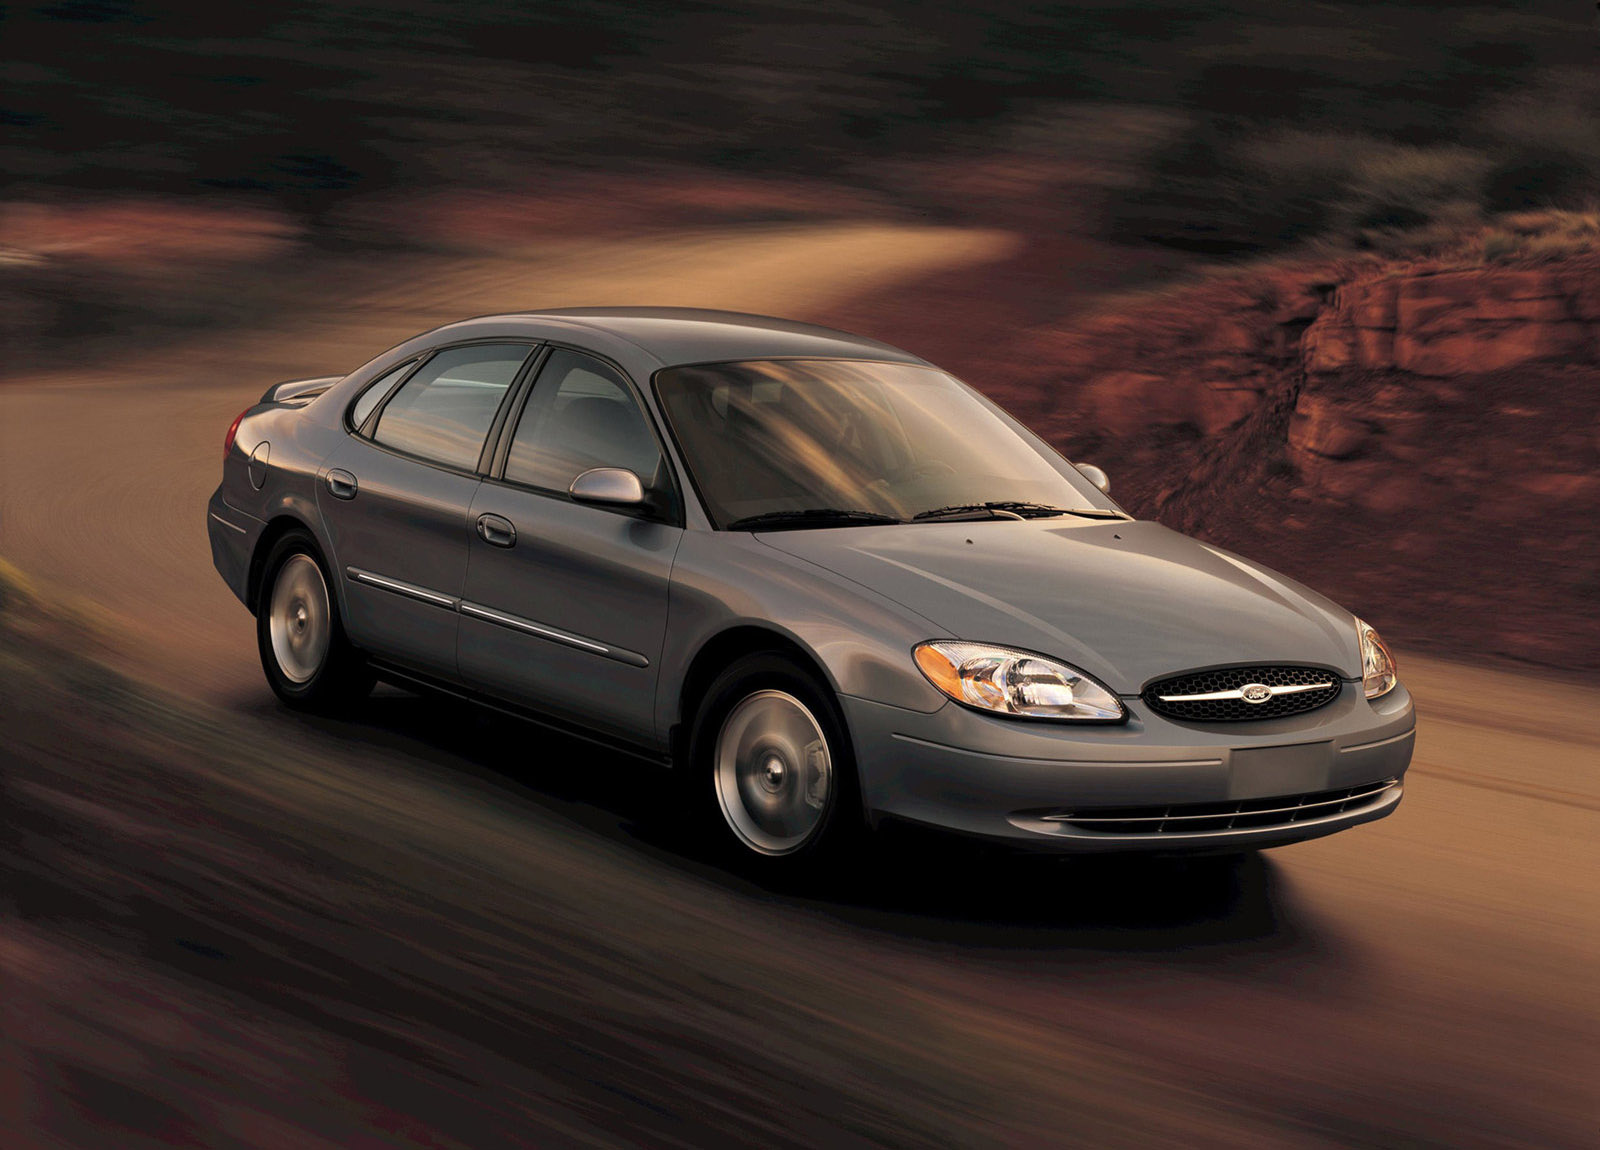 2003 Ford Taurus Hd Pictures